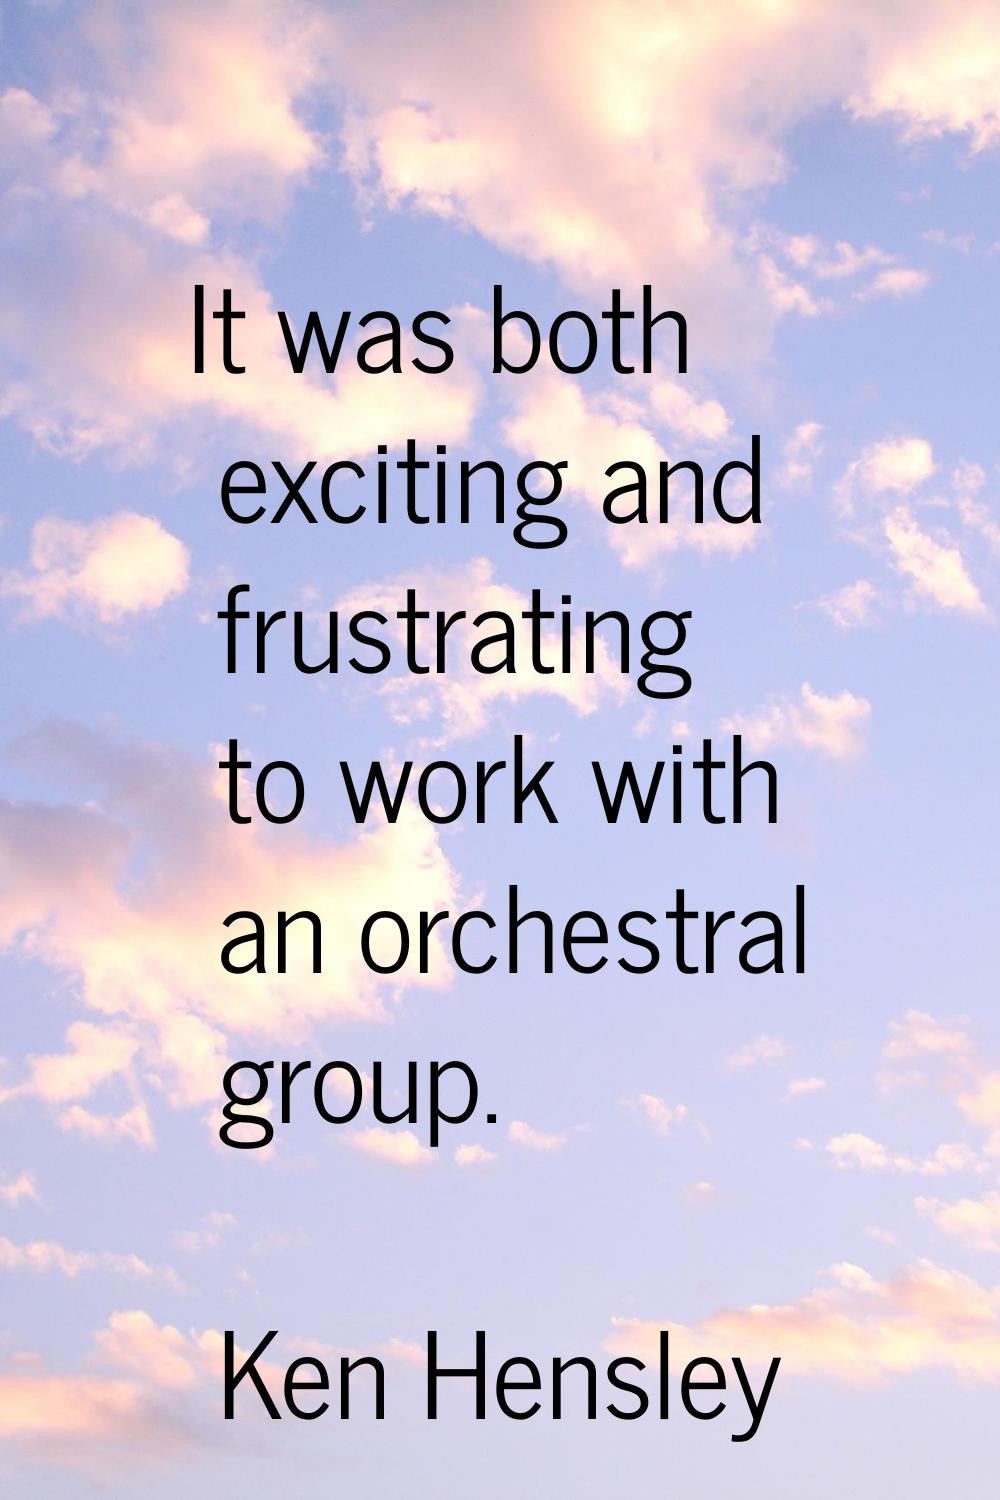 It was both exciting and frustrating to work with an orchestral group.